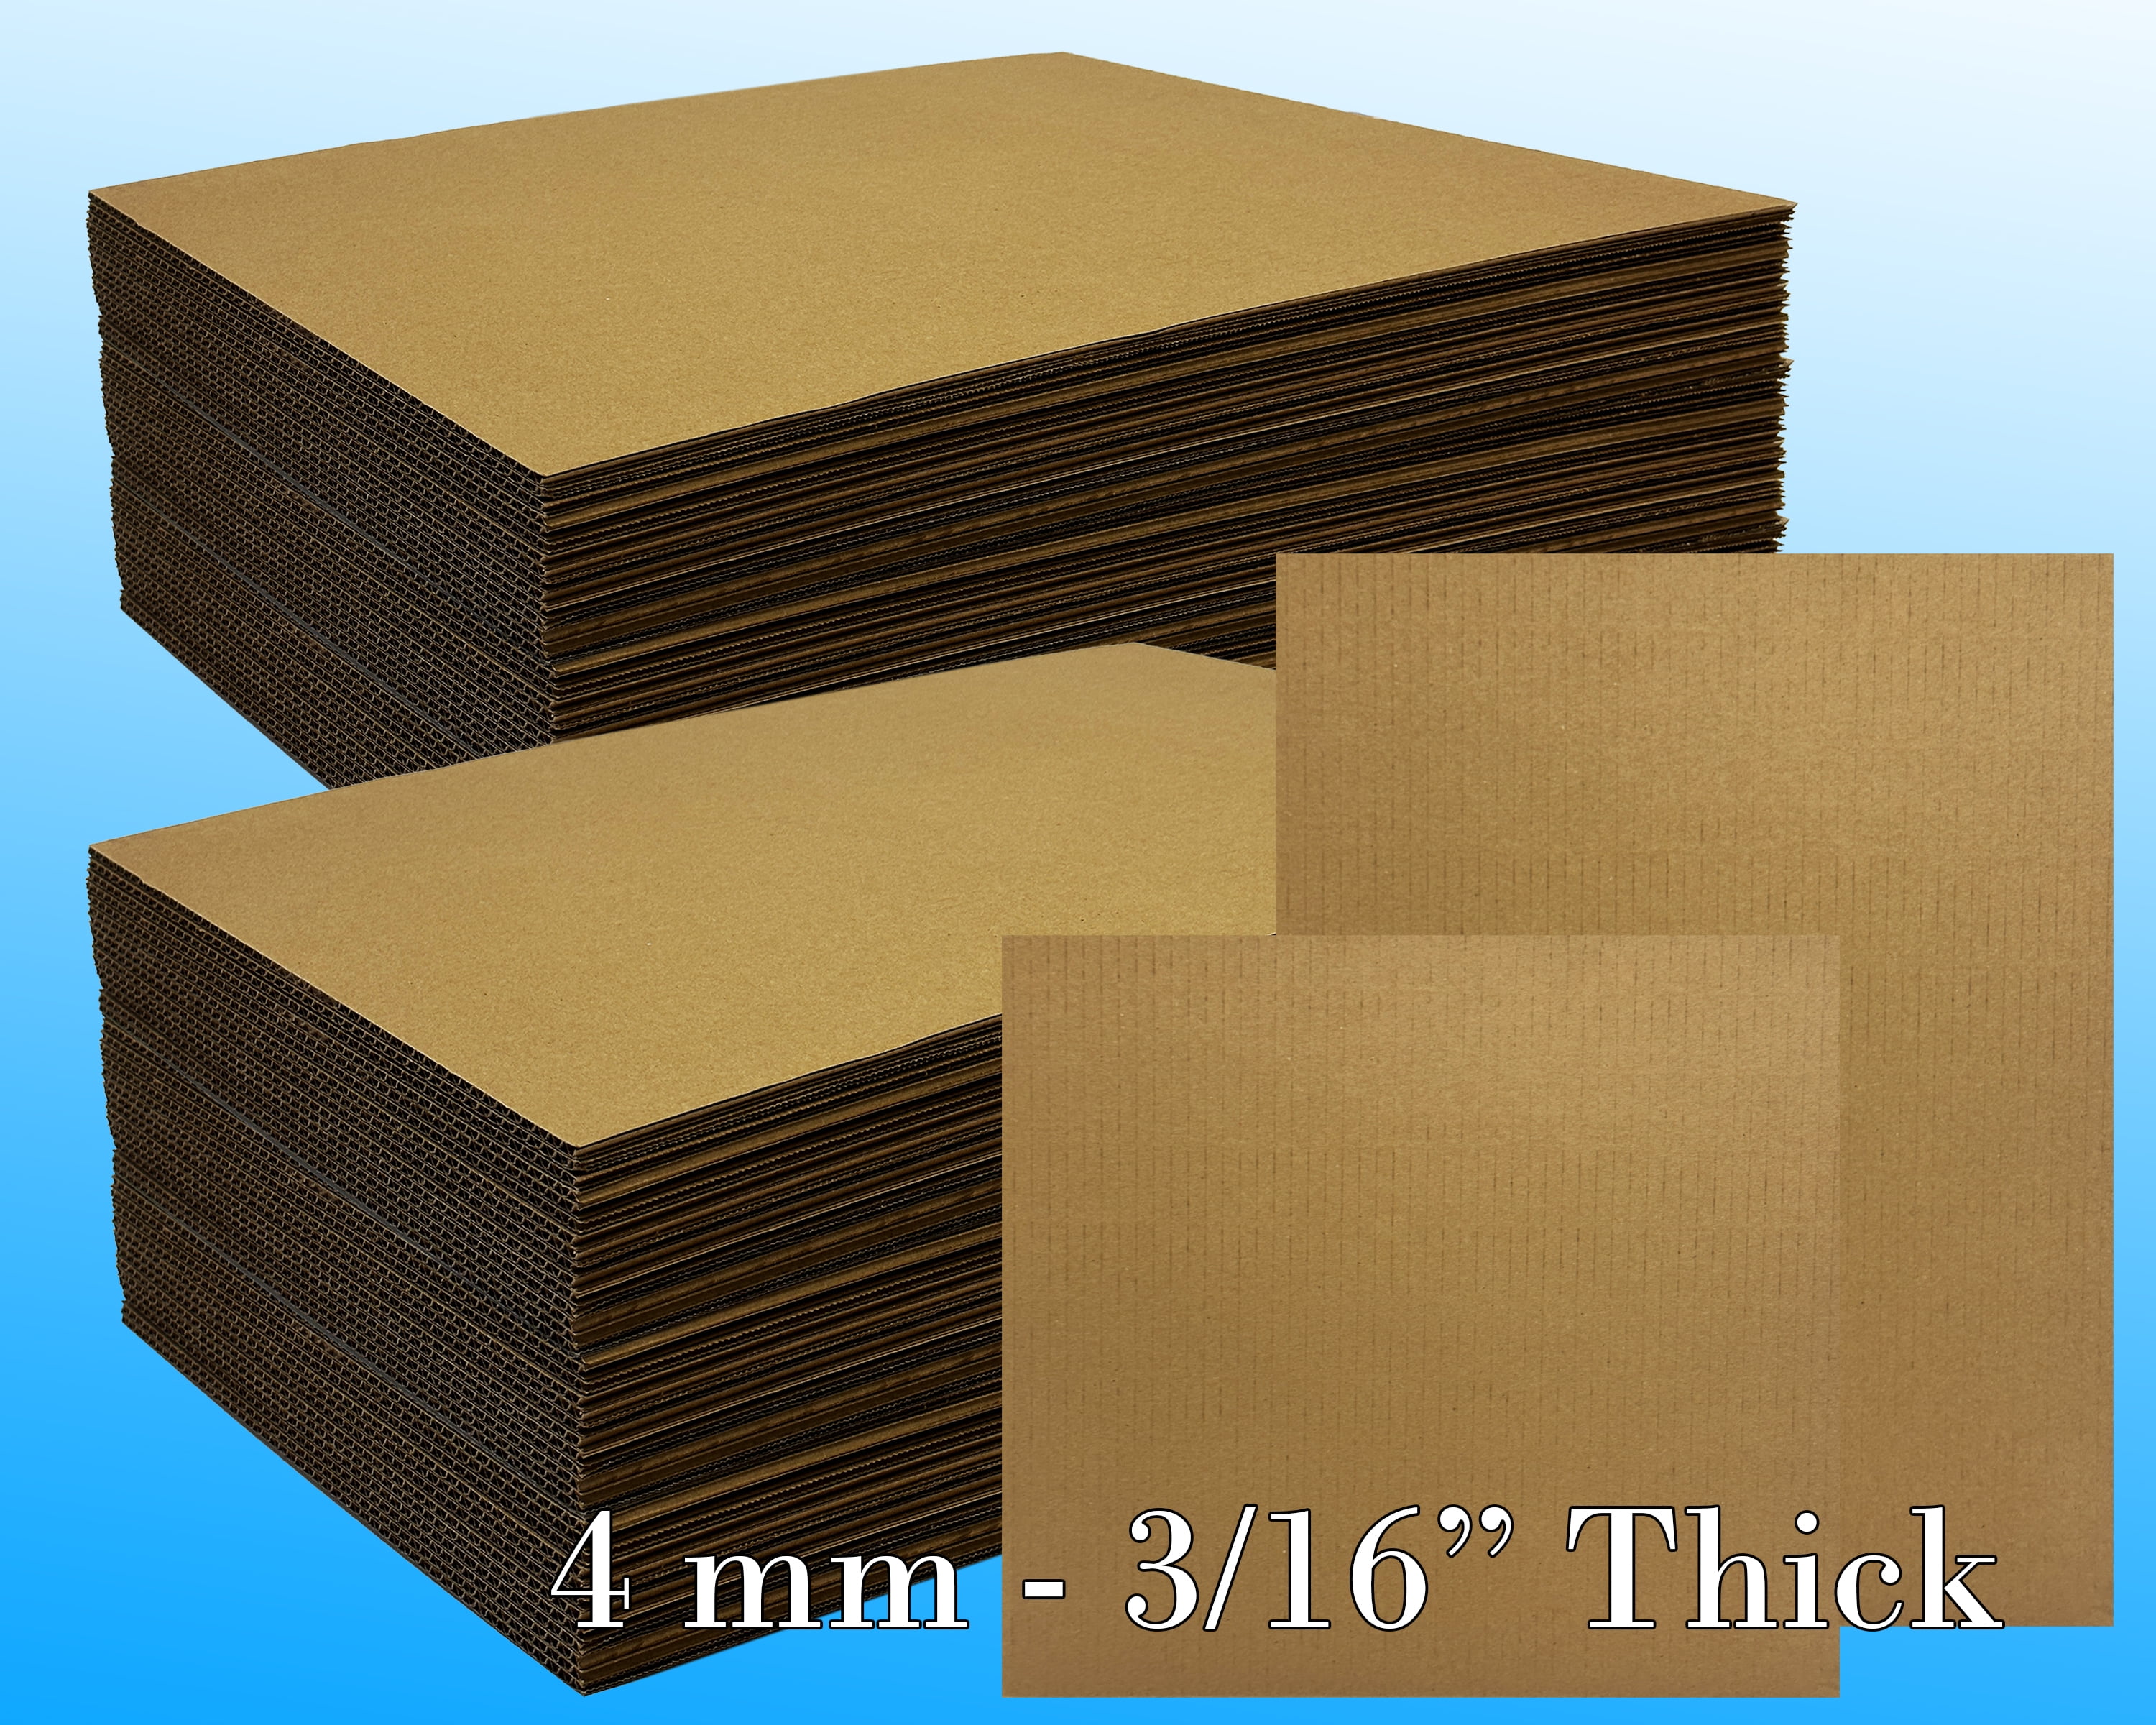 Corrugated Cardboard Sheets 4mm - 3/16 Thick 24x36- 5 Pack. Filler Insert  Pads, Brown Frame Backing Rectangular & Square Flat Boards for Art&Crafts,  DIY Projects, Mailing,Dividers & Packaging 